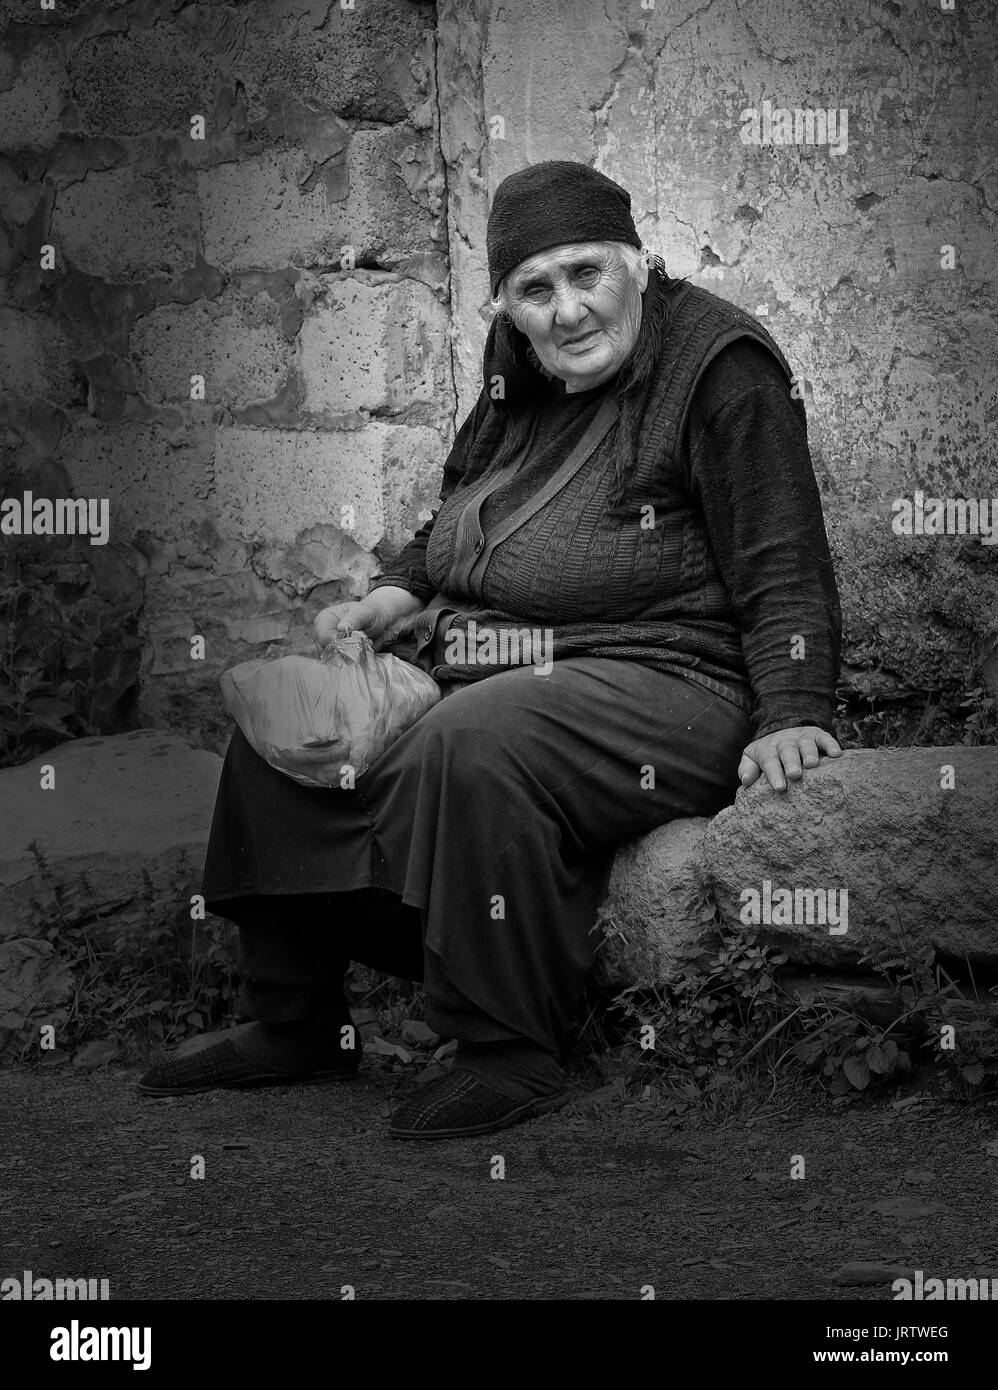 SNO, GEORGIA - JULY 1, 2014: Old woman sitting on a stone in a Caucasian village on July 1, 2014 in Georgia, Europe Stock Photo